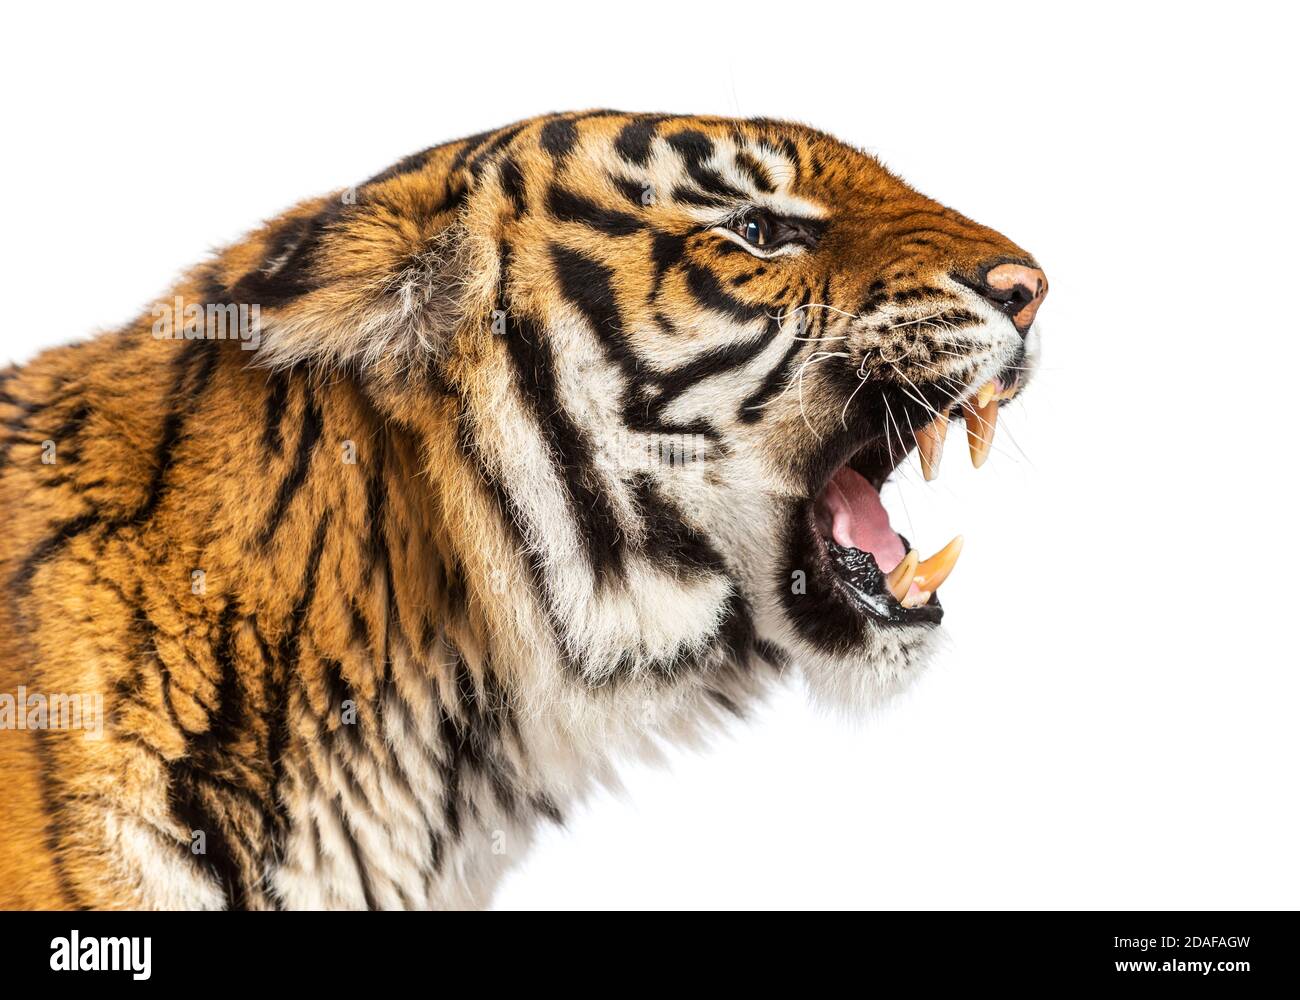 close-up on a Tiger's head looking angry, showing its tooth Stock Photo